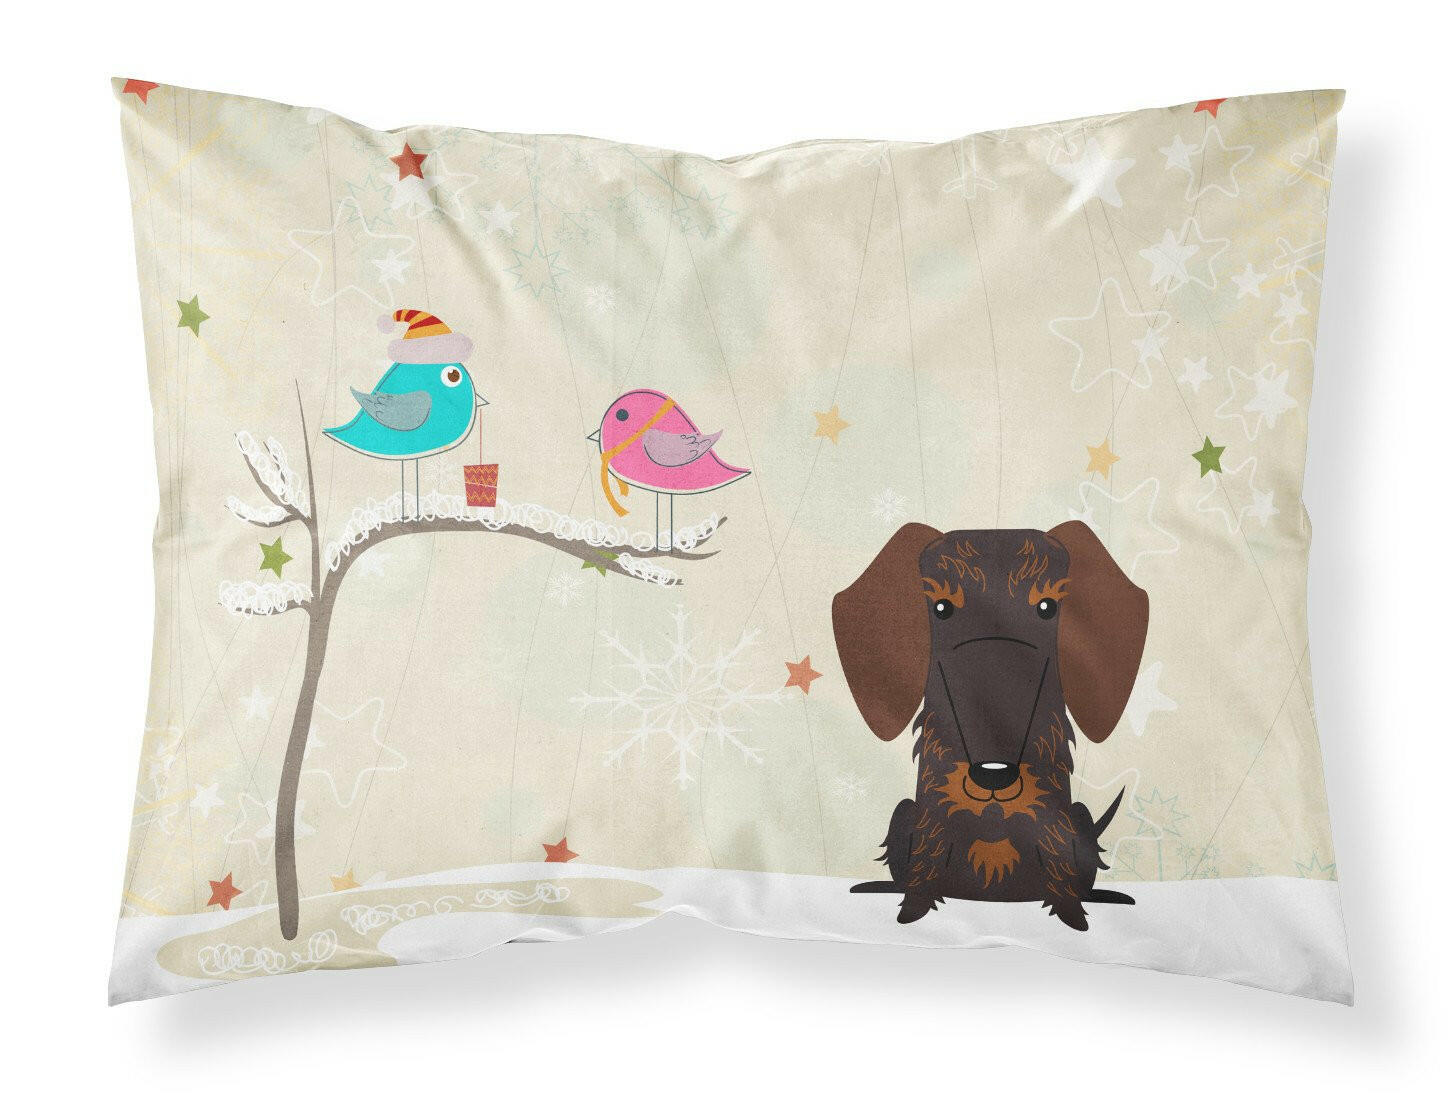 Christmas Presents between Friends Wire Haired Dachshund Chocolate Fabric Standard Pillowcase BB2601PILLOWCASE by Caroline's Treasures